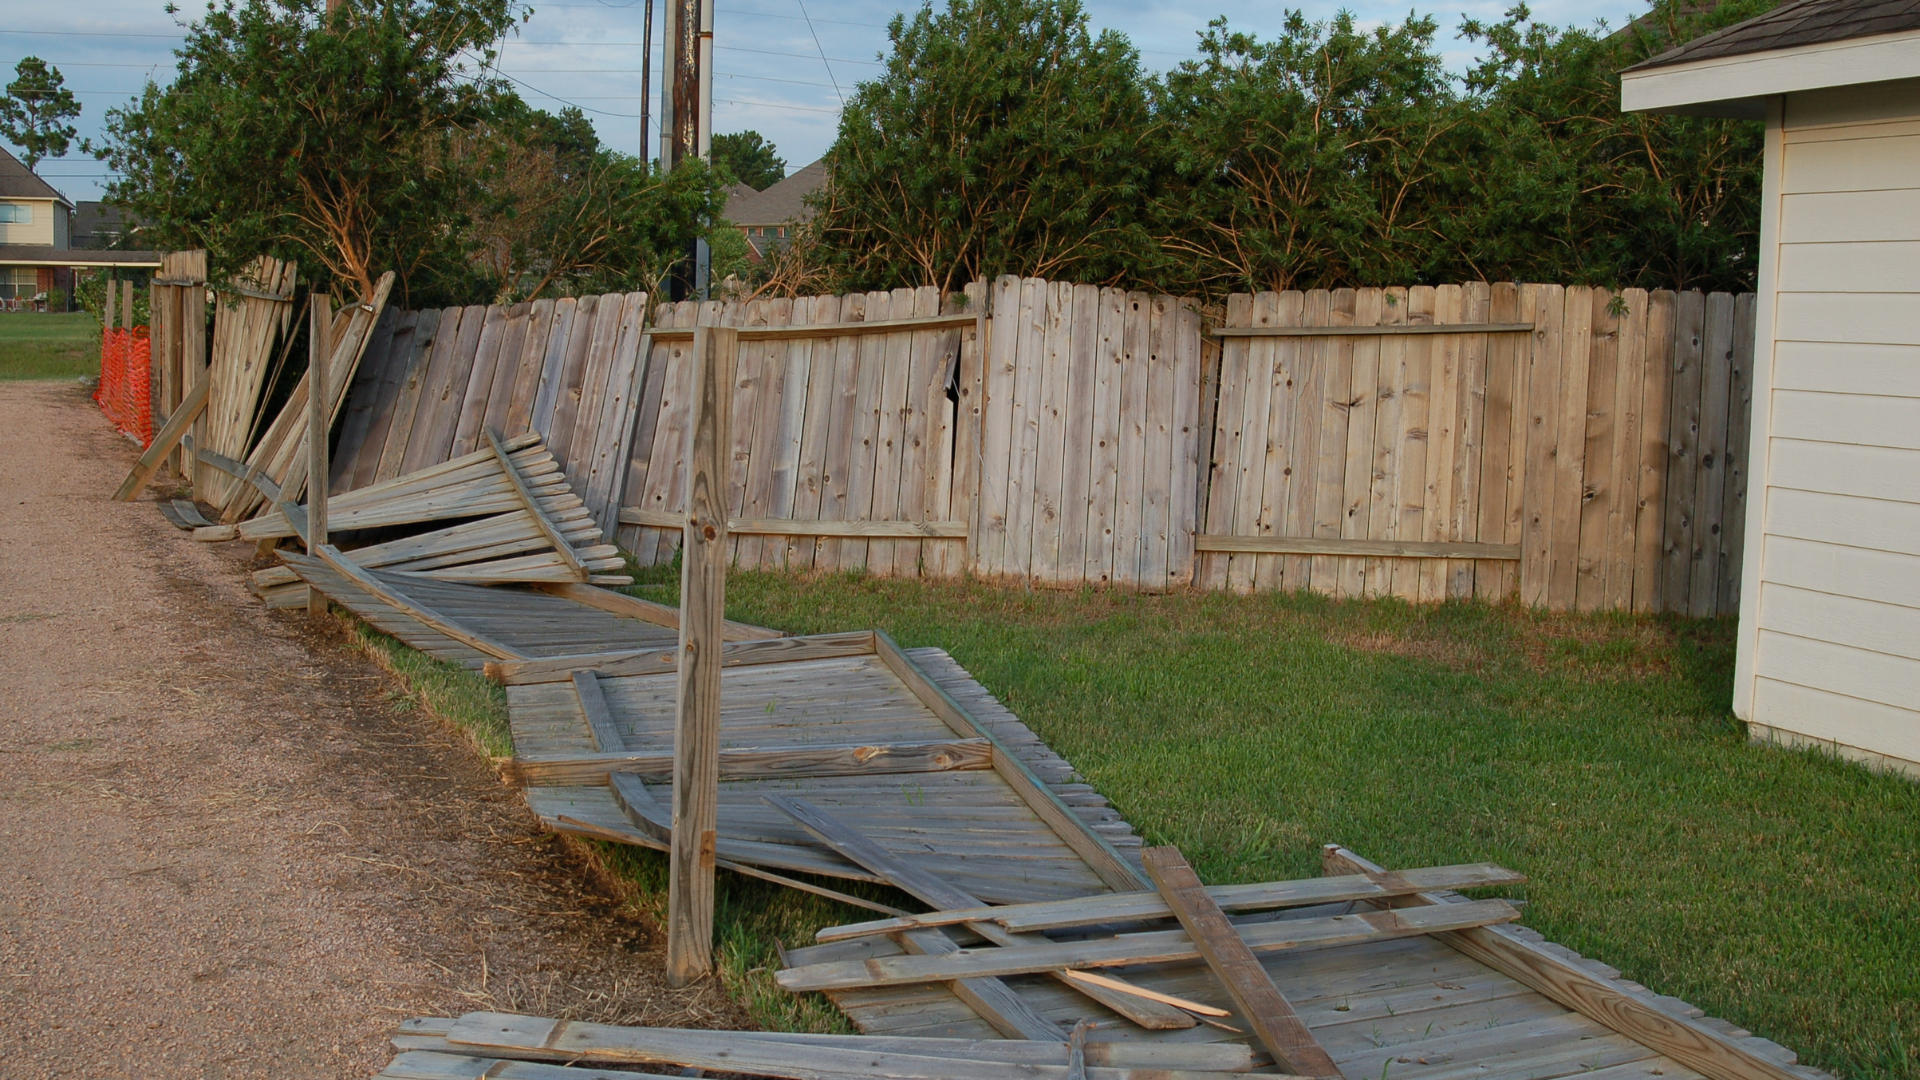 collapsed and damaged wooden fence